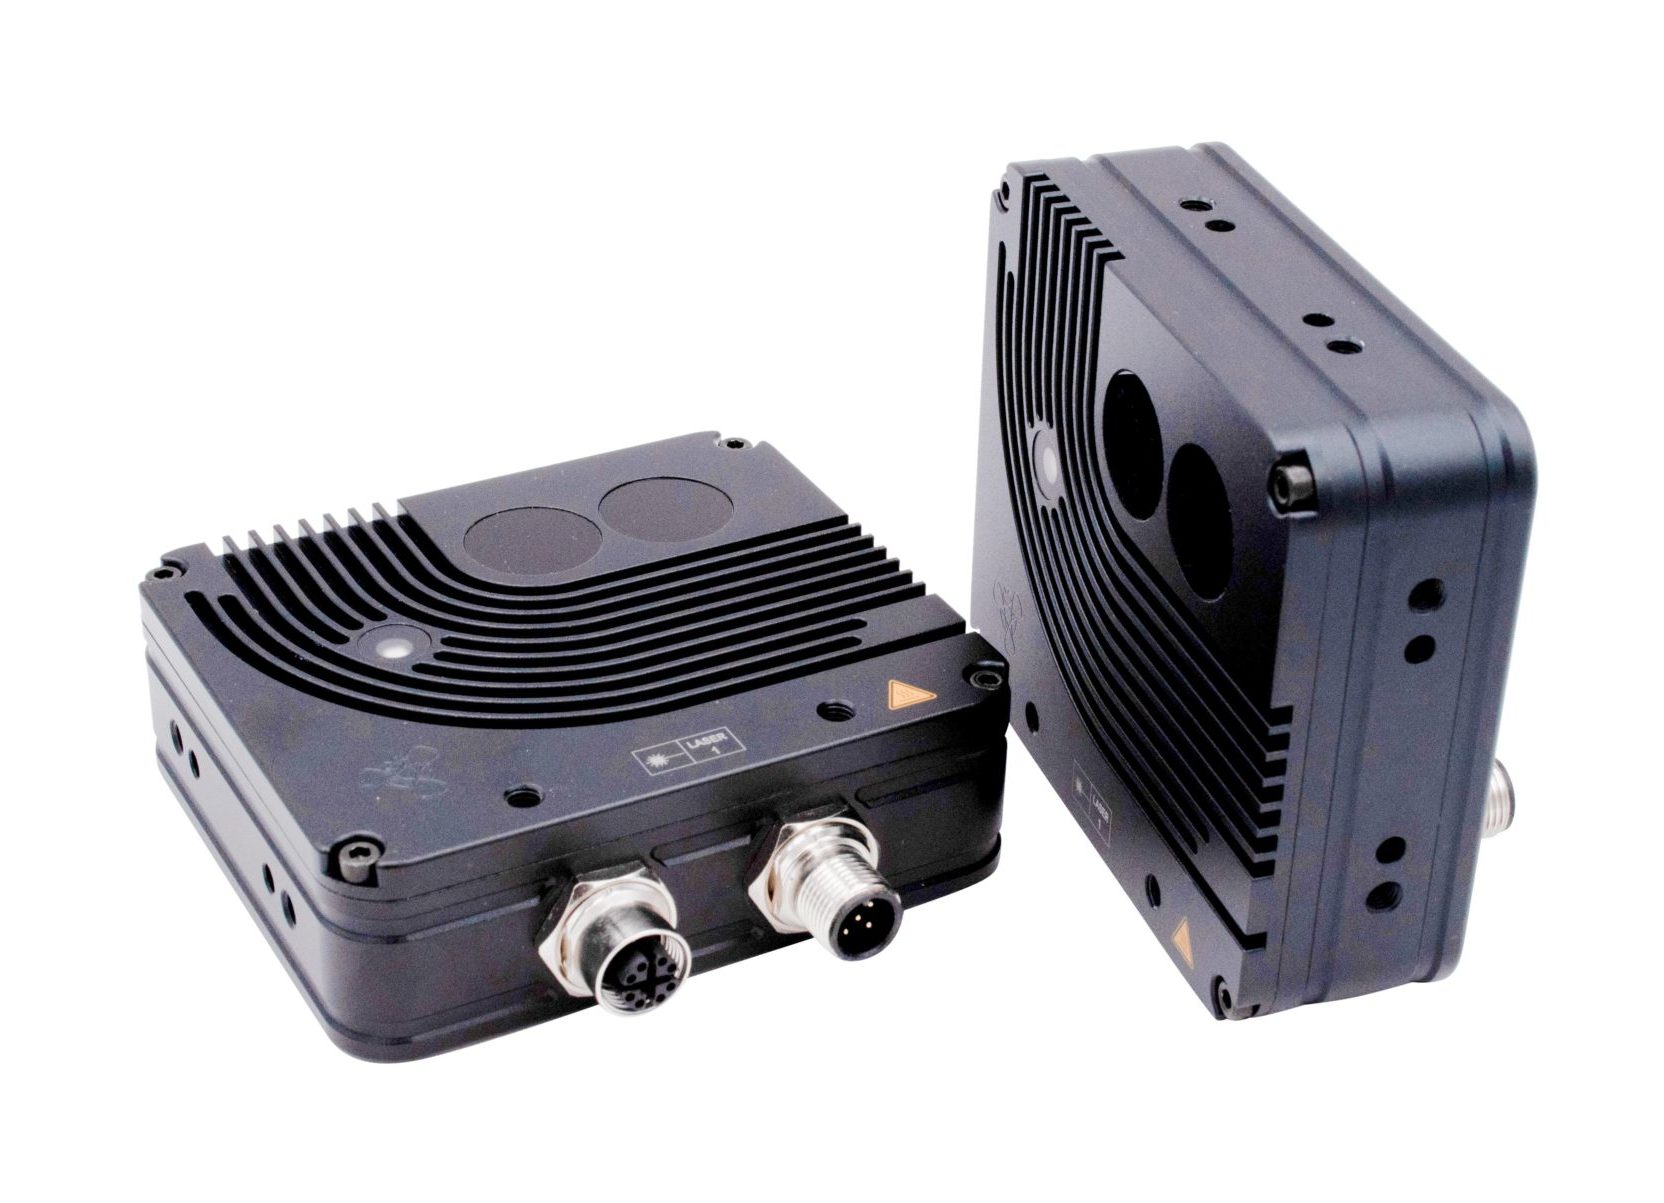 Terabee Blog An update on 3D cameras: Applications, specs and RFQs